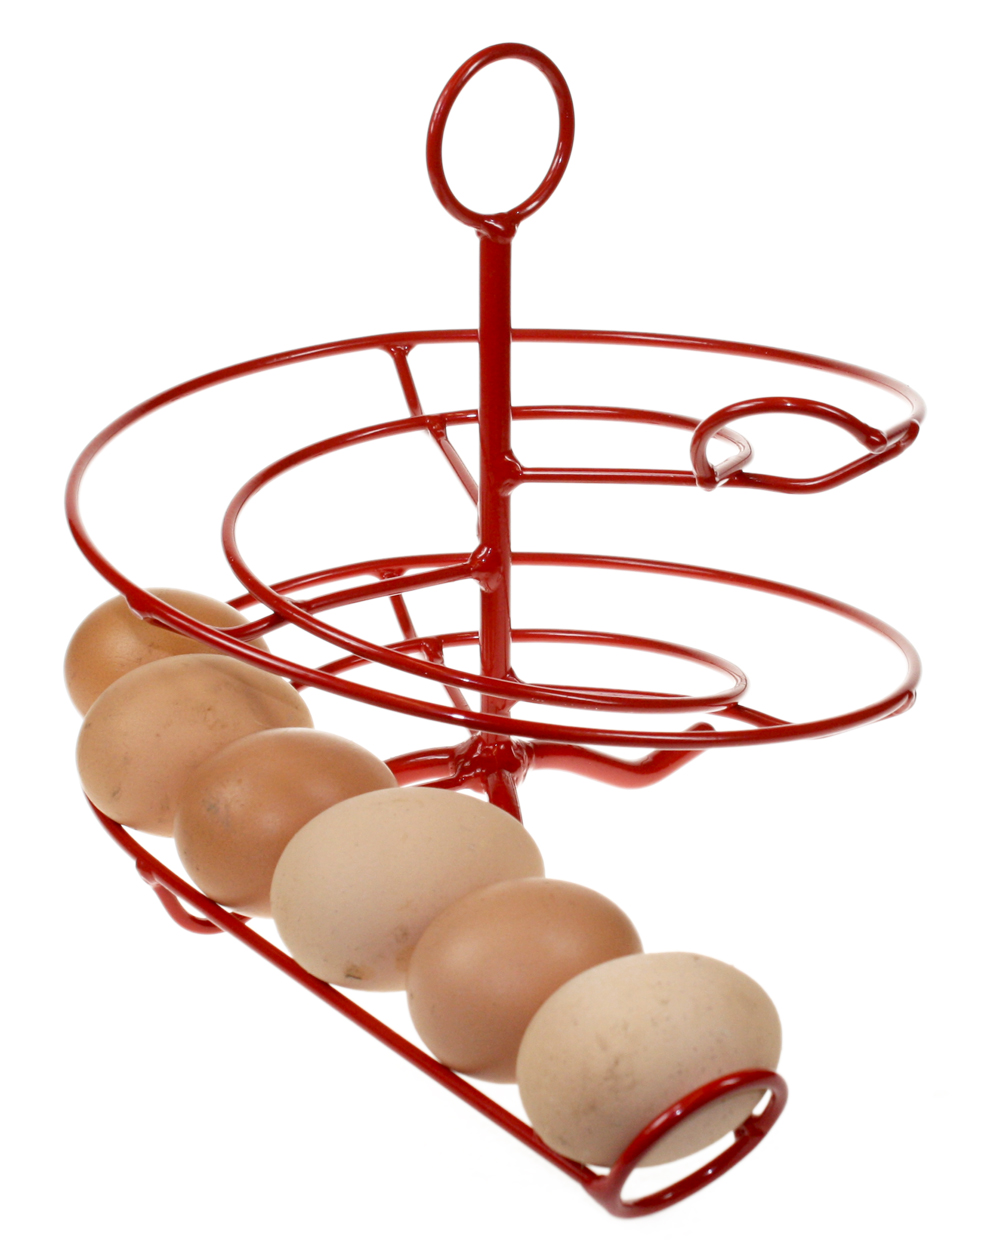 The Egg Skelter - an easy, efficient way to store your eggs!